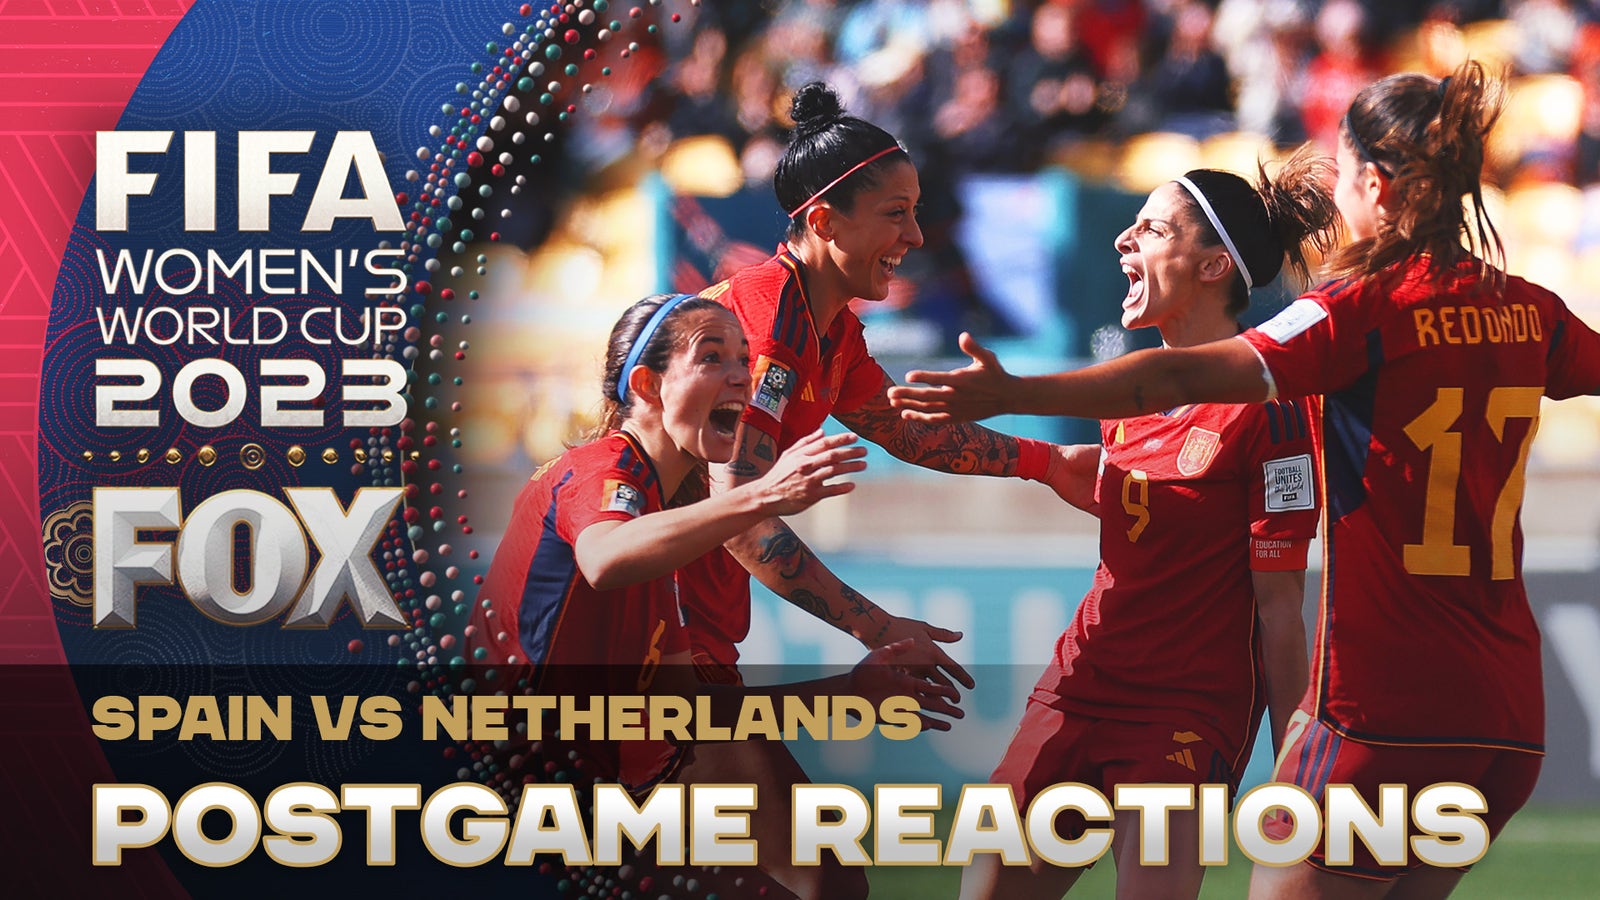 Reacting to Spain eliminating Netherlands in the quarterfinals